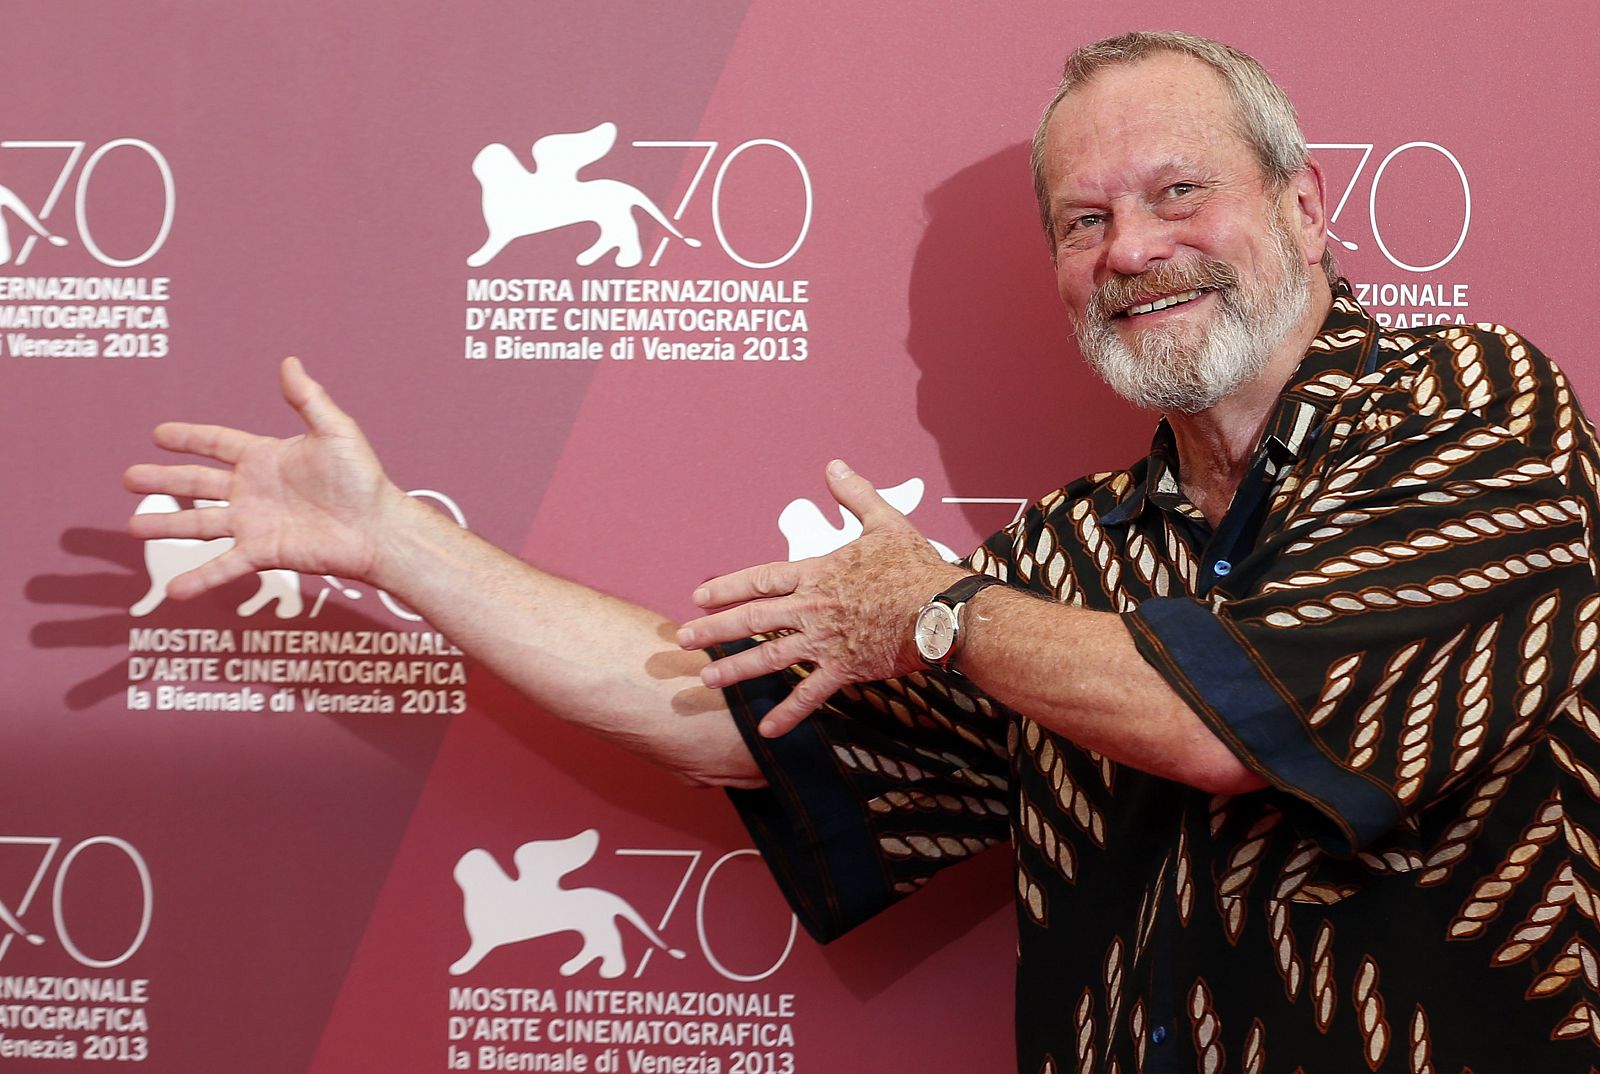 Director Gilliam poses during a photocall for his movie "The Zero Theorem" during the 70th Venice Film Festival in Venice